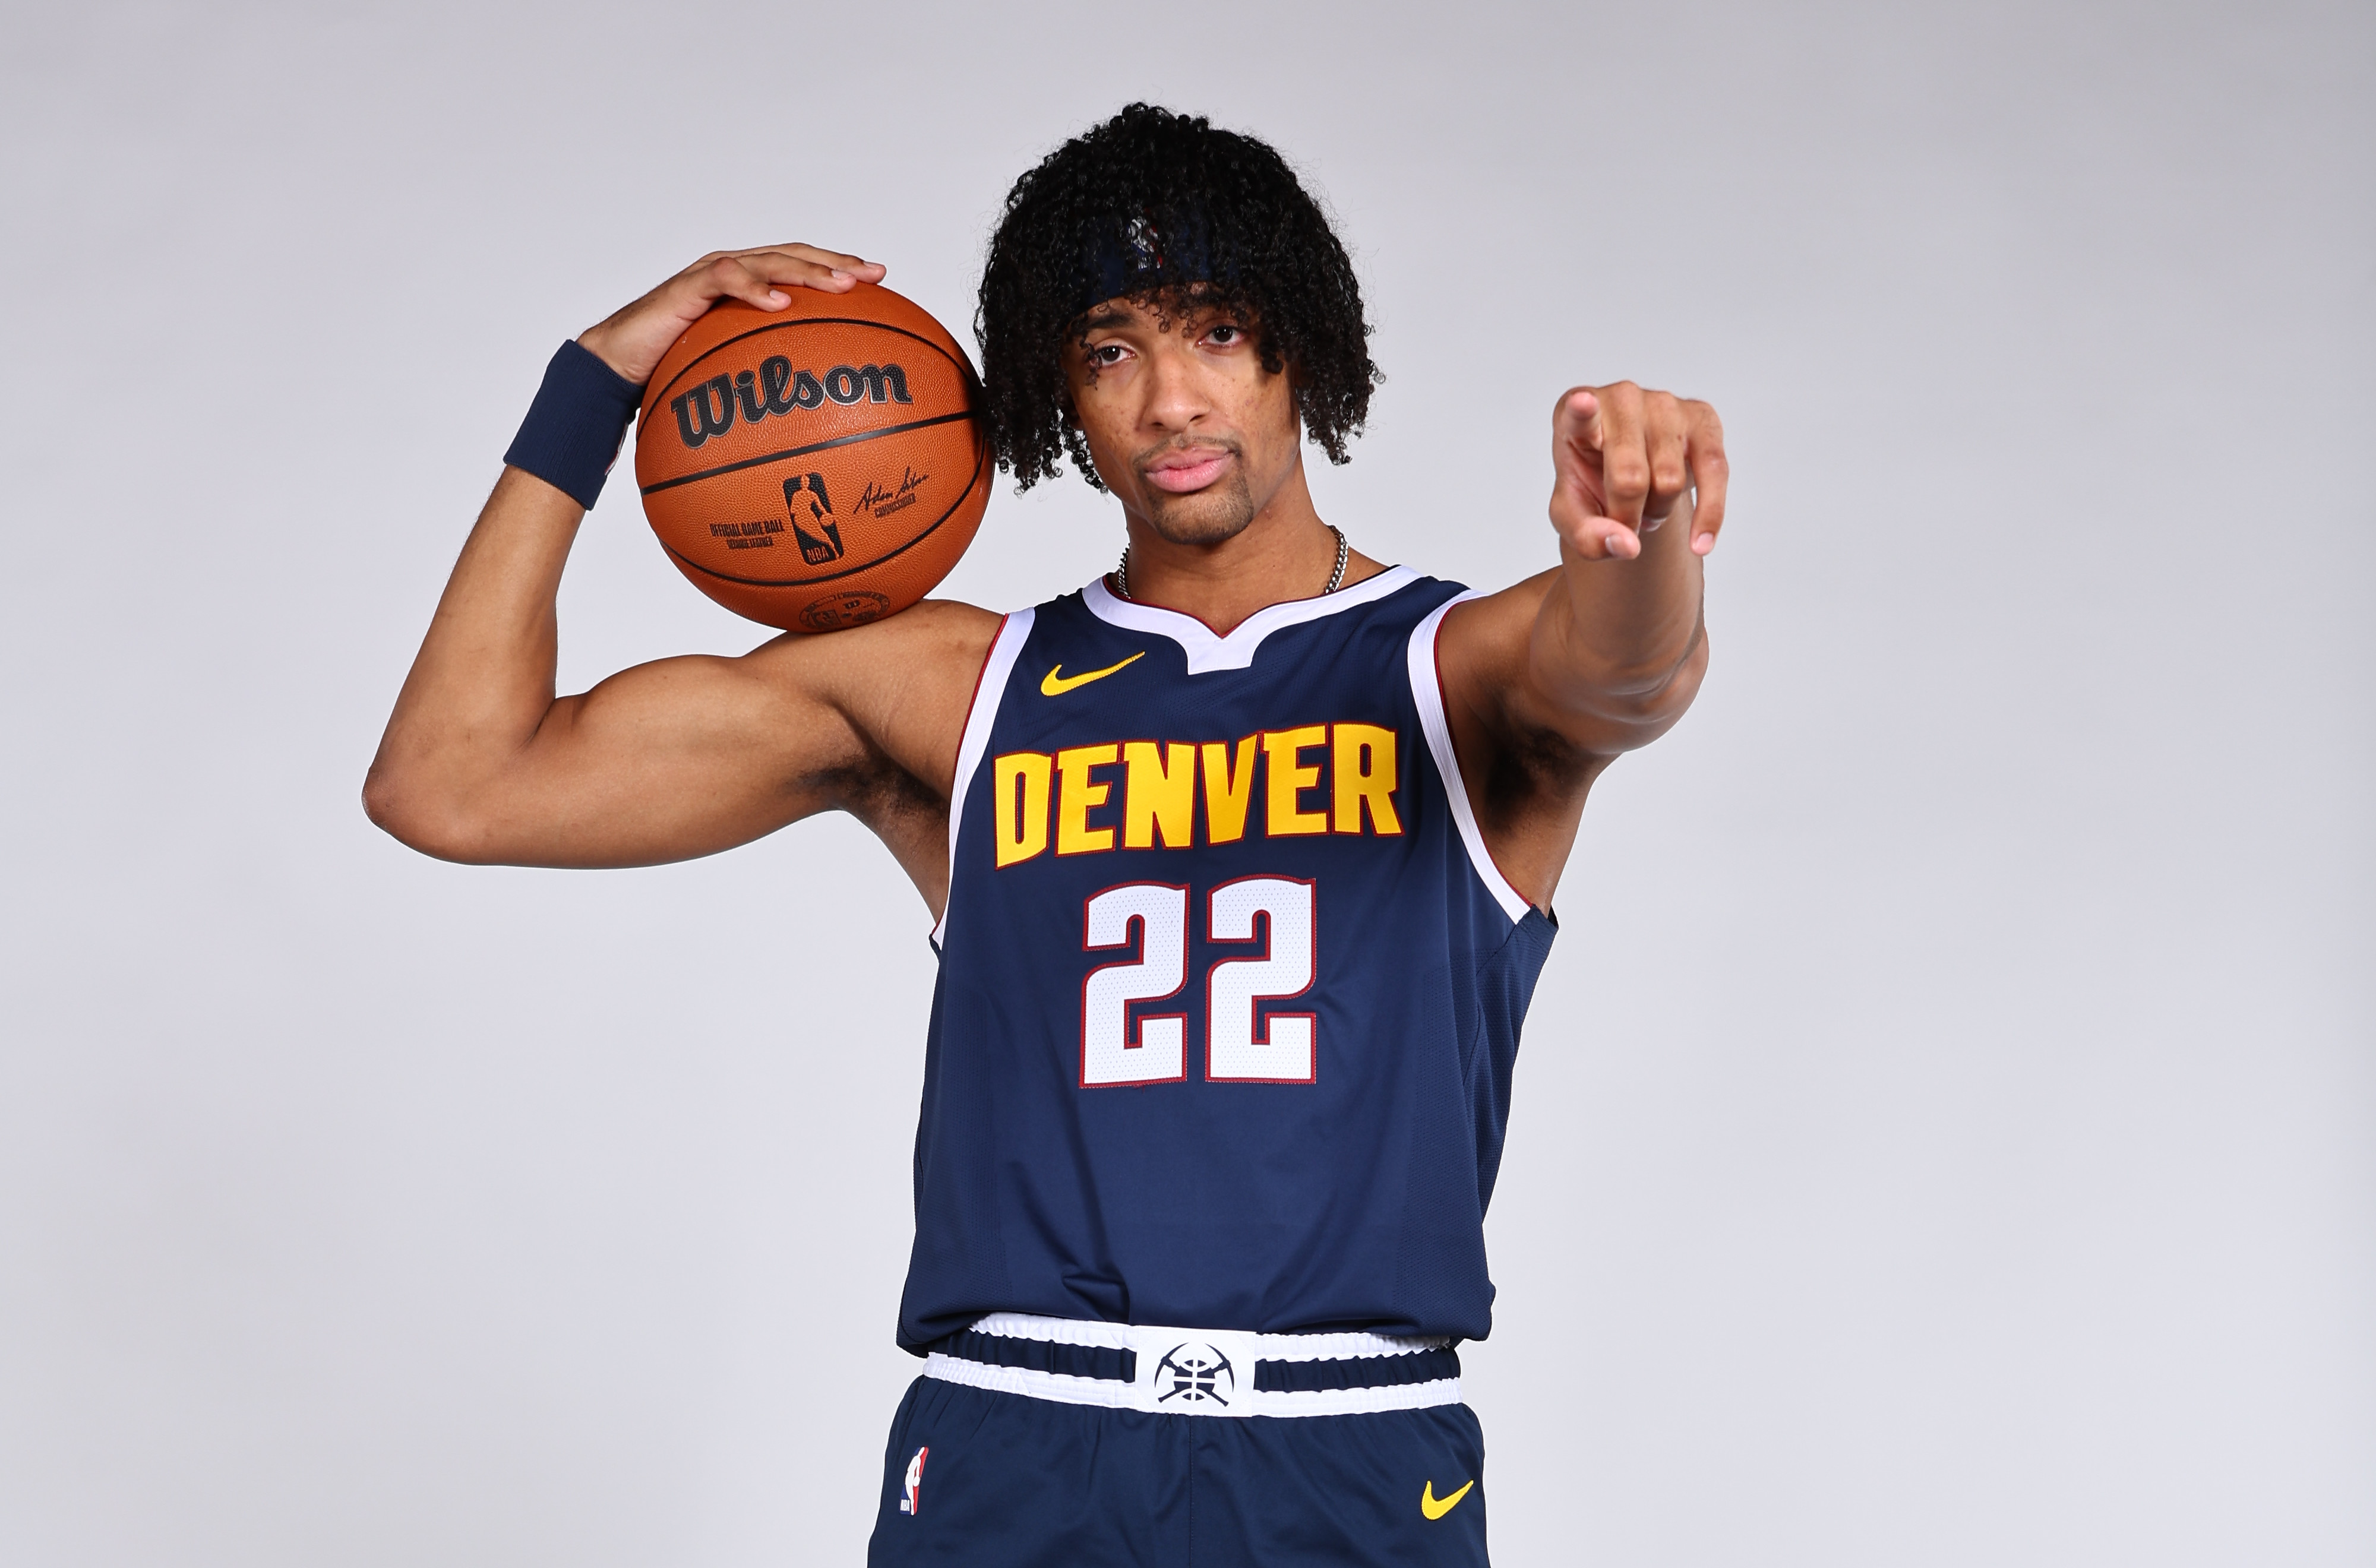 Denver Nuggets on X: Hey, we know that guy Unc's jersey hanging